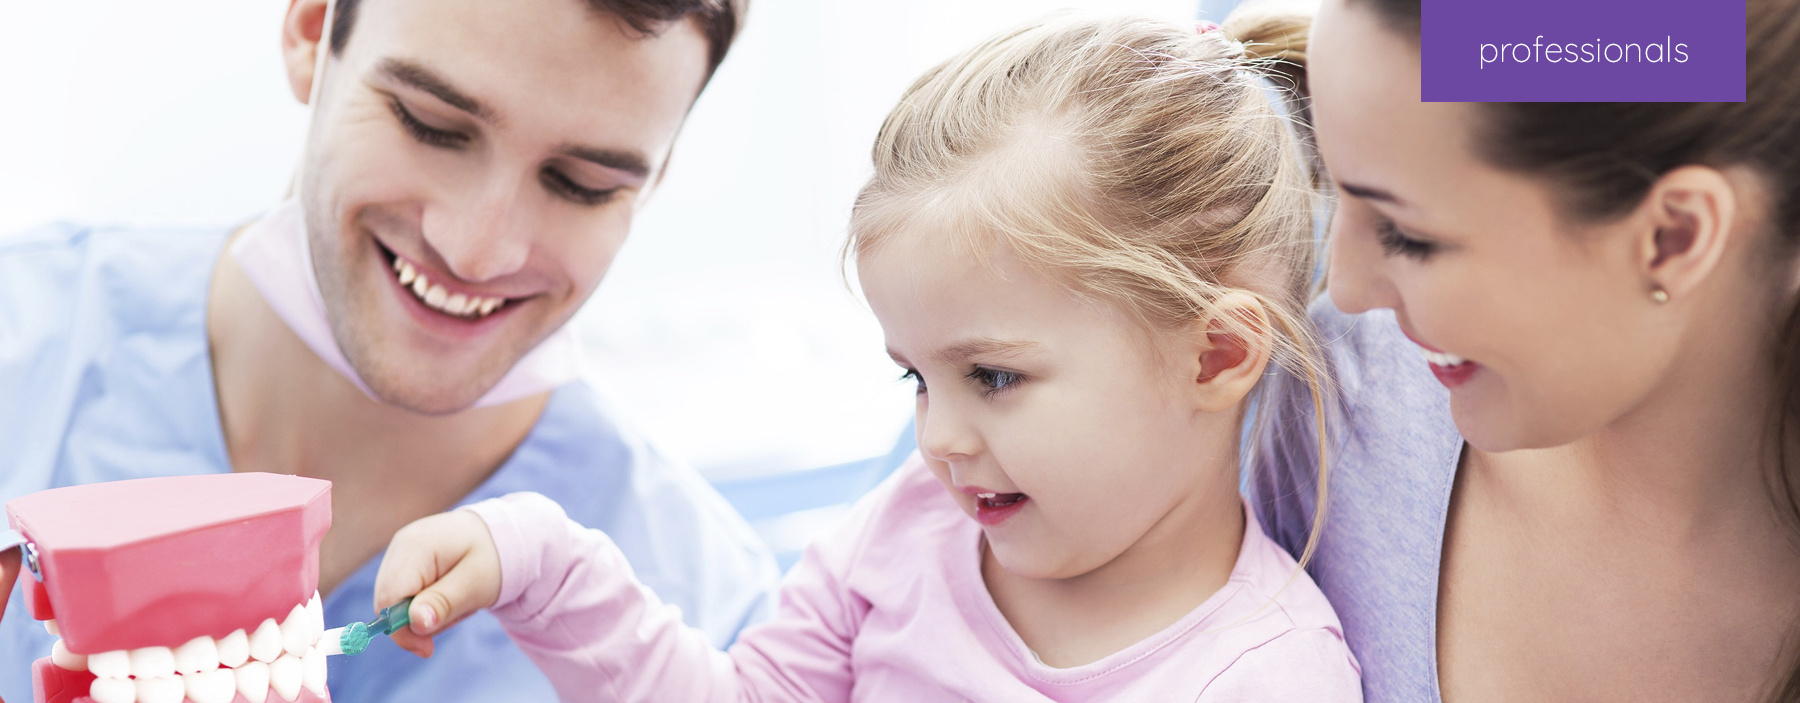 A child patient interacting with her mother and dentist